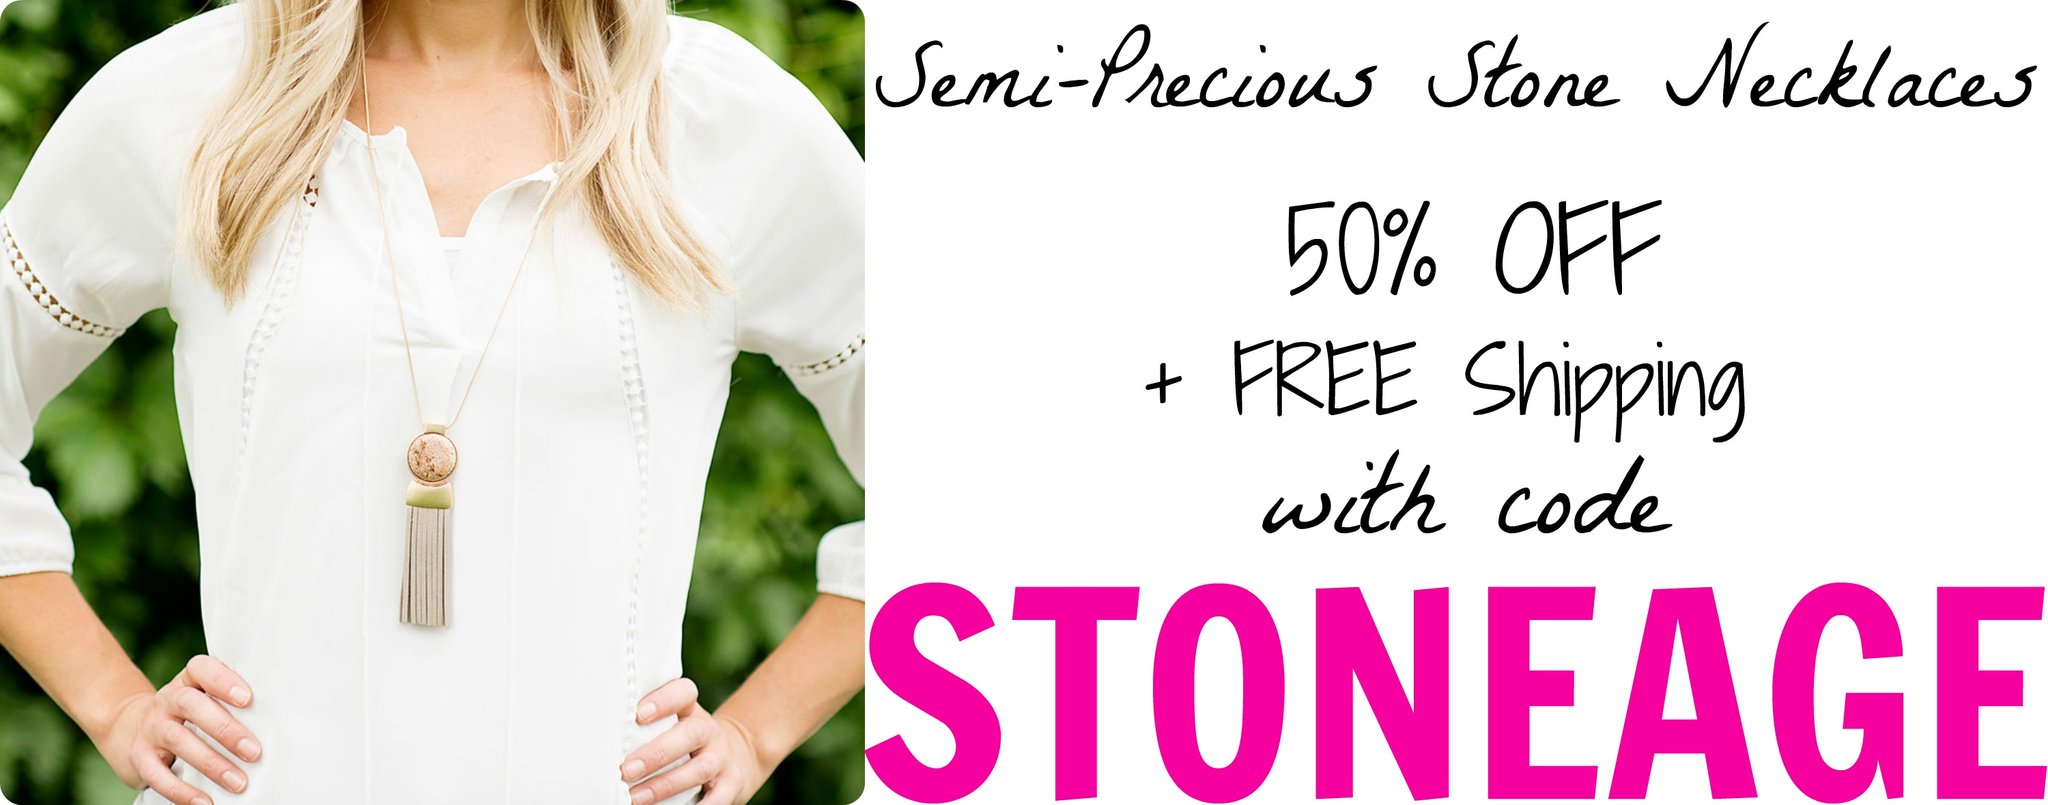 Style Steals – CUTE Stone Necklaces – Under $10.00! Free shipping!